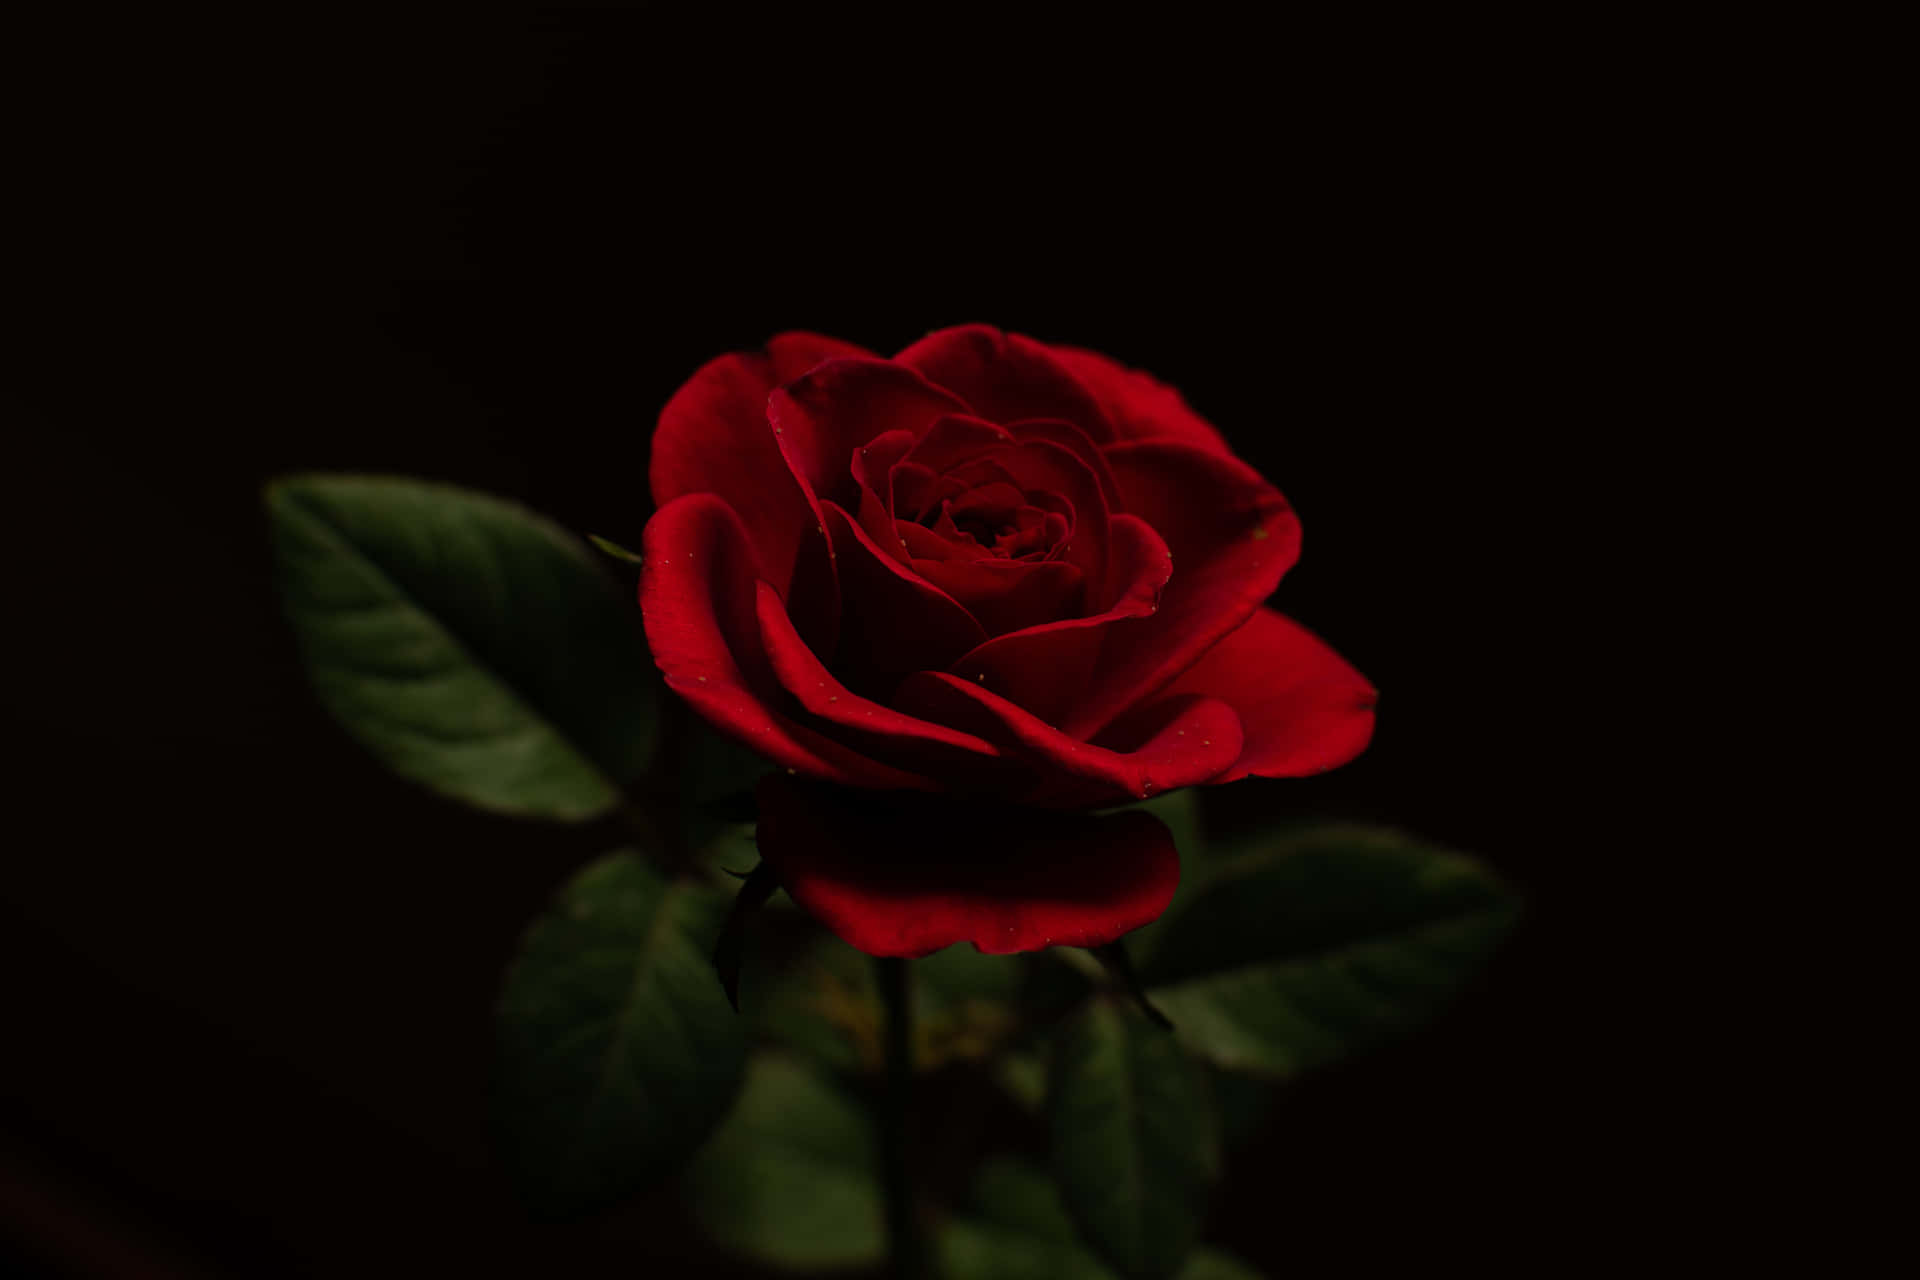 A beautiful red rose surrounded by tinged petals and buds, shining in the early morning sunlight. Wallpaper